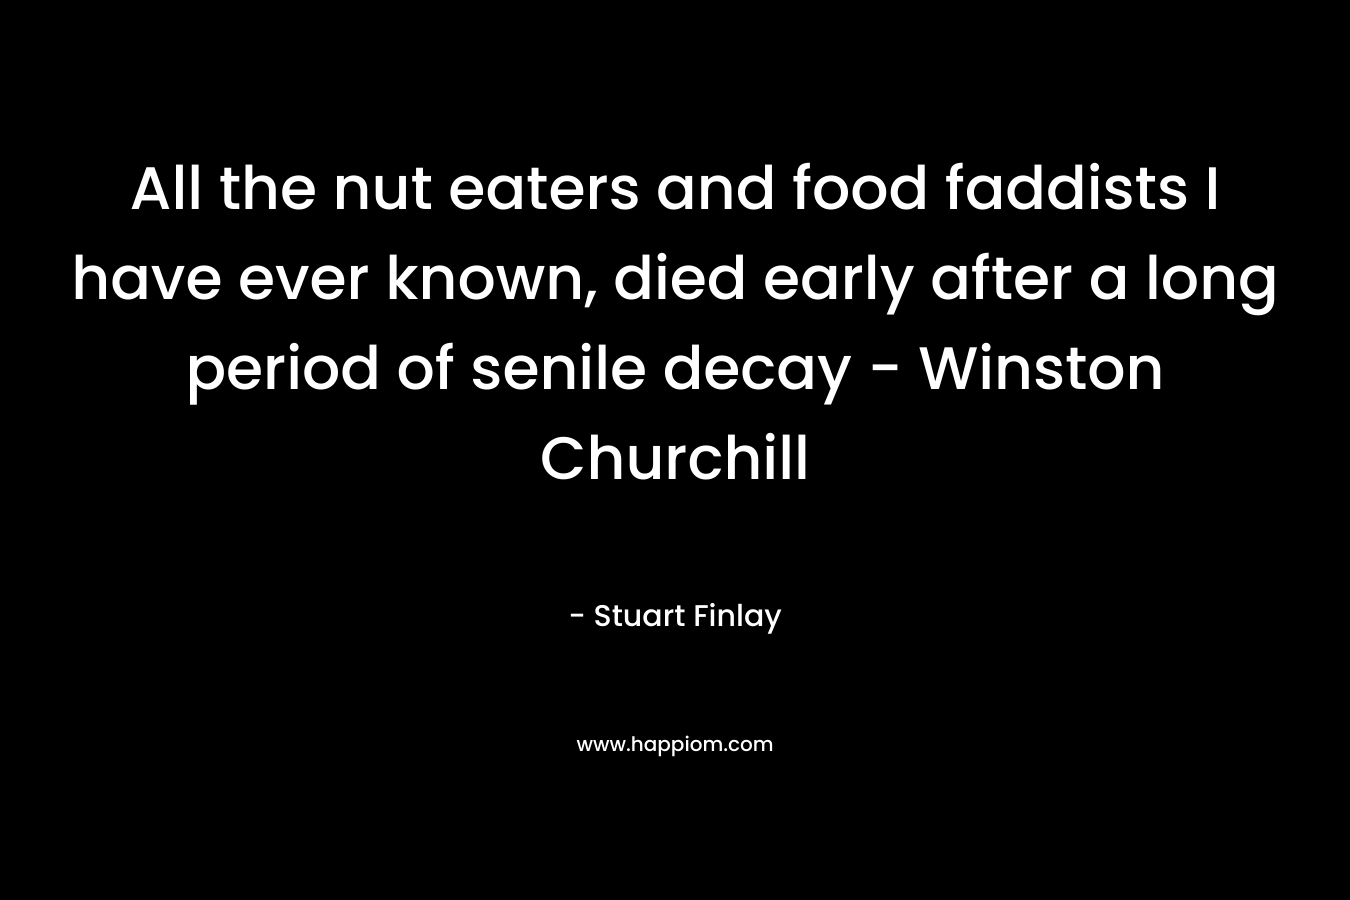 All the nut eaters and food faddists I have ever known, died early after a long period of senile decay - Winston Churchill